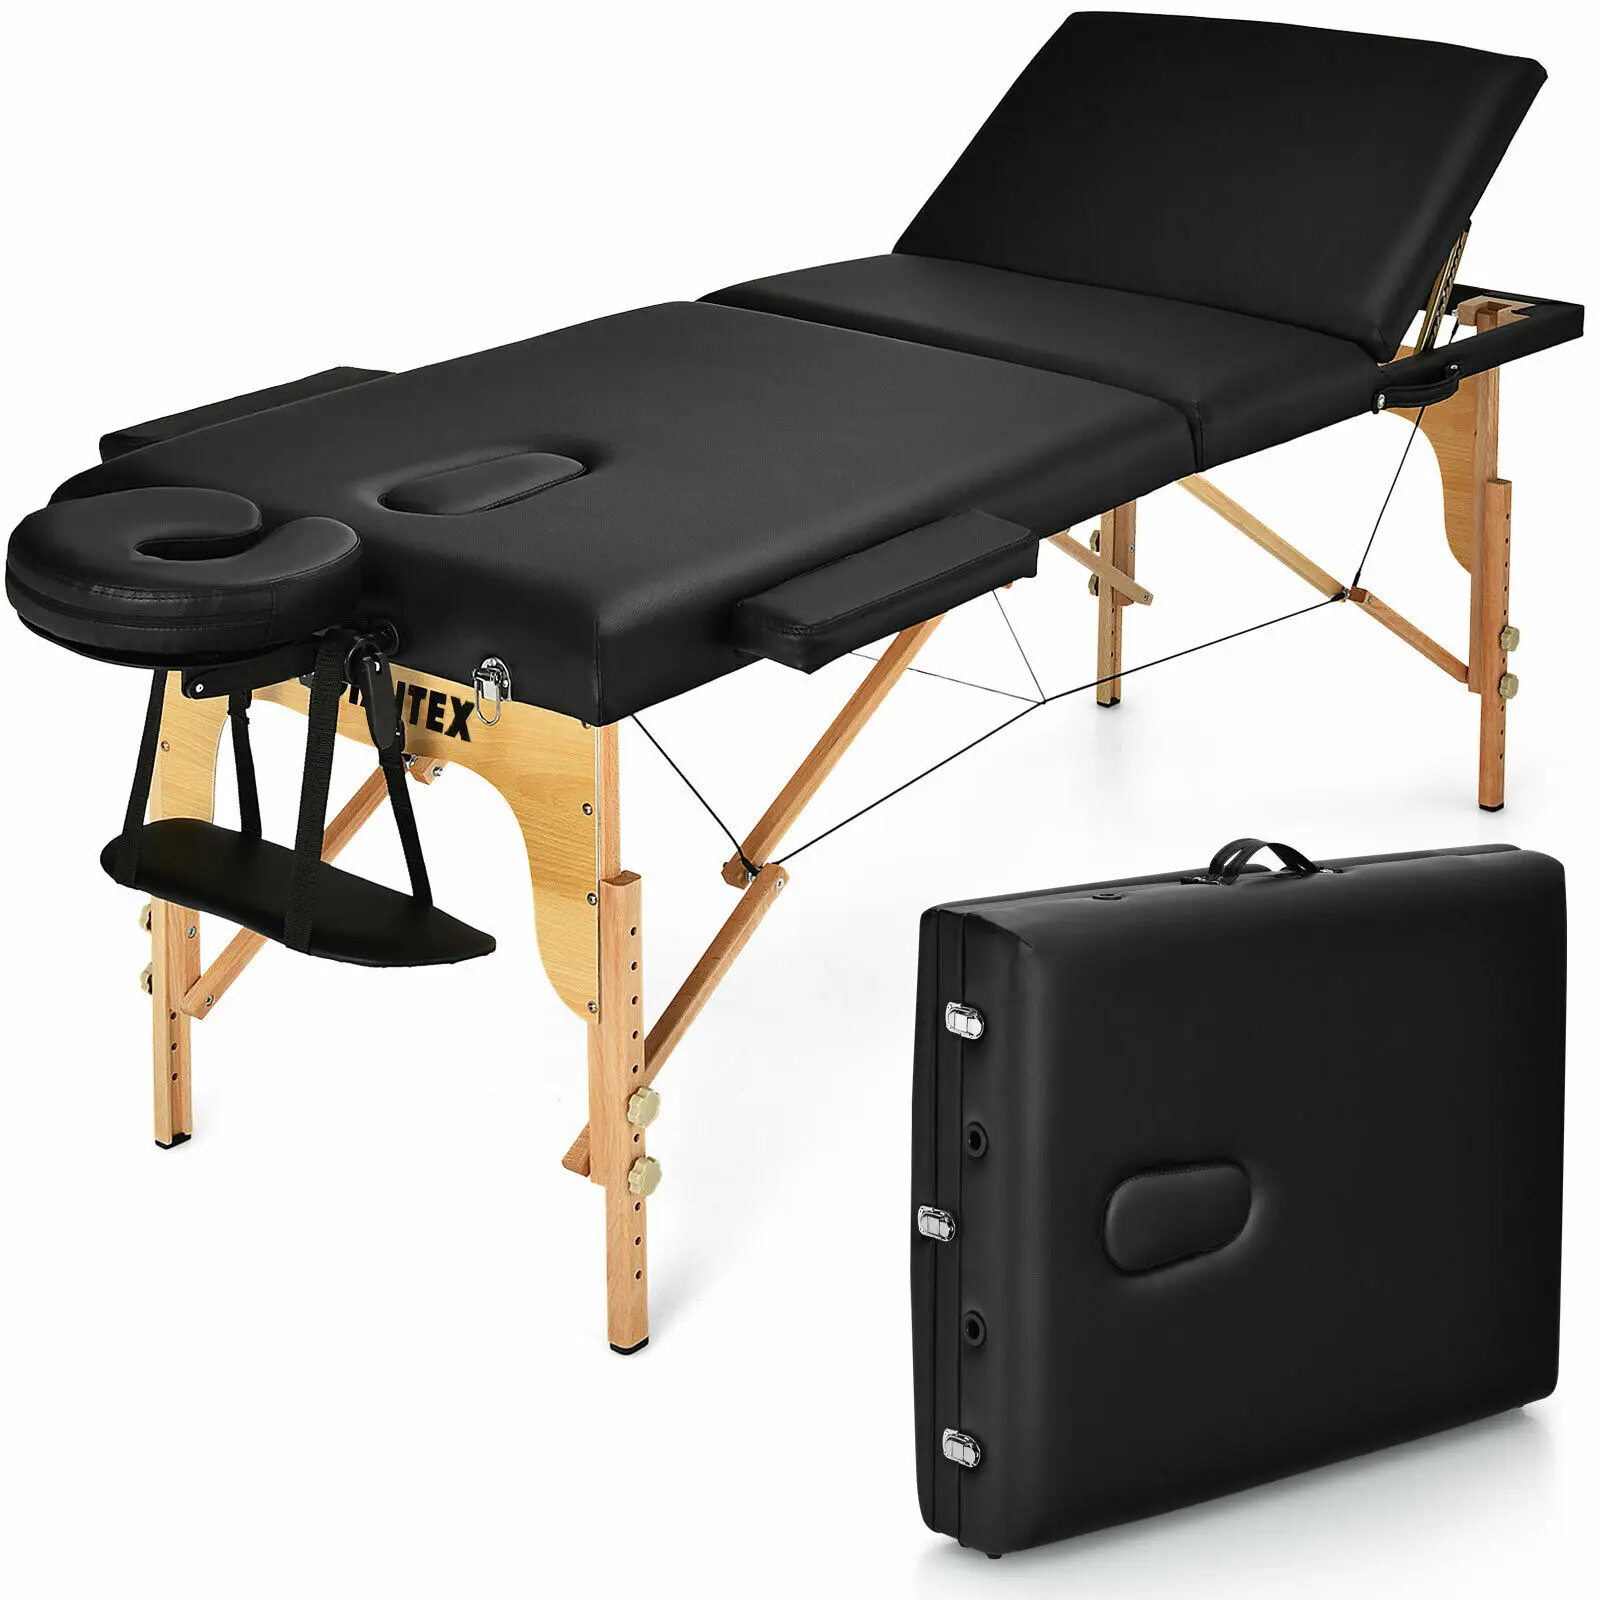 

Giantex Portable Massage Table 3 Fold 84"L Adjustable Spa Bed w/Carry Case Black